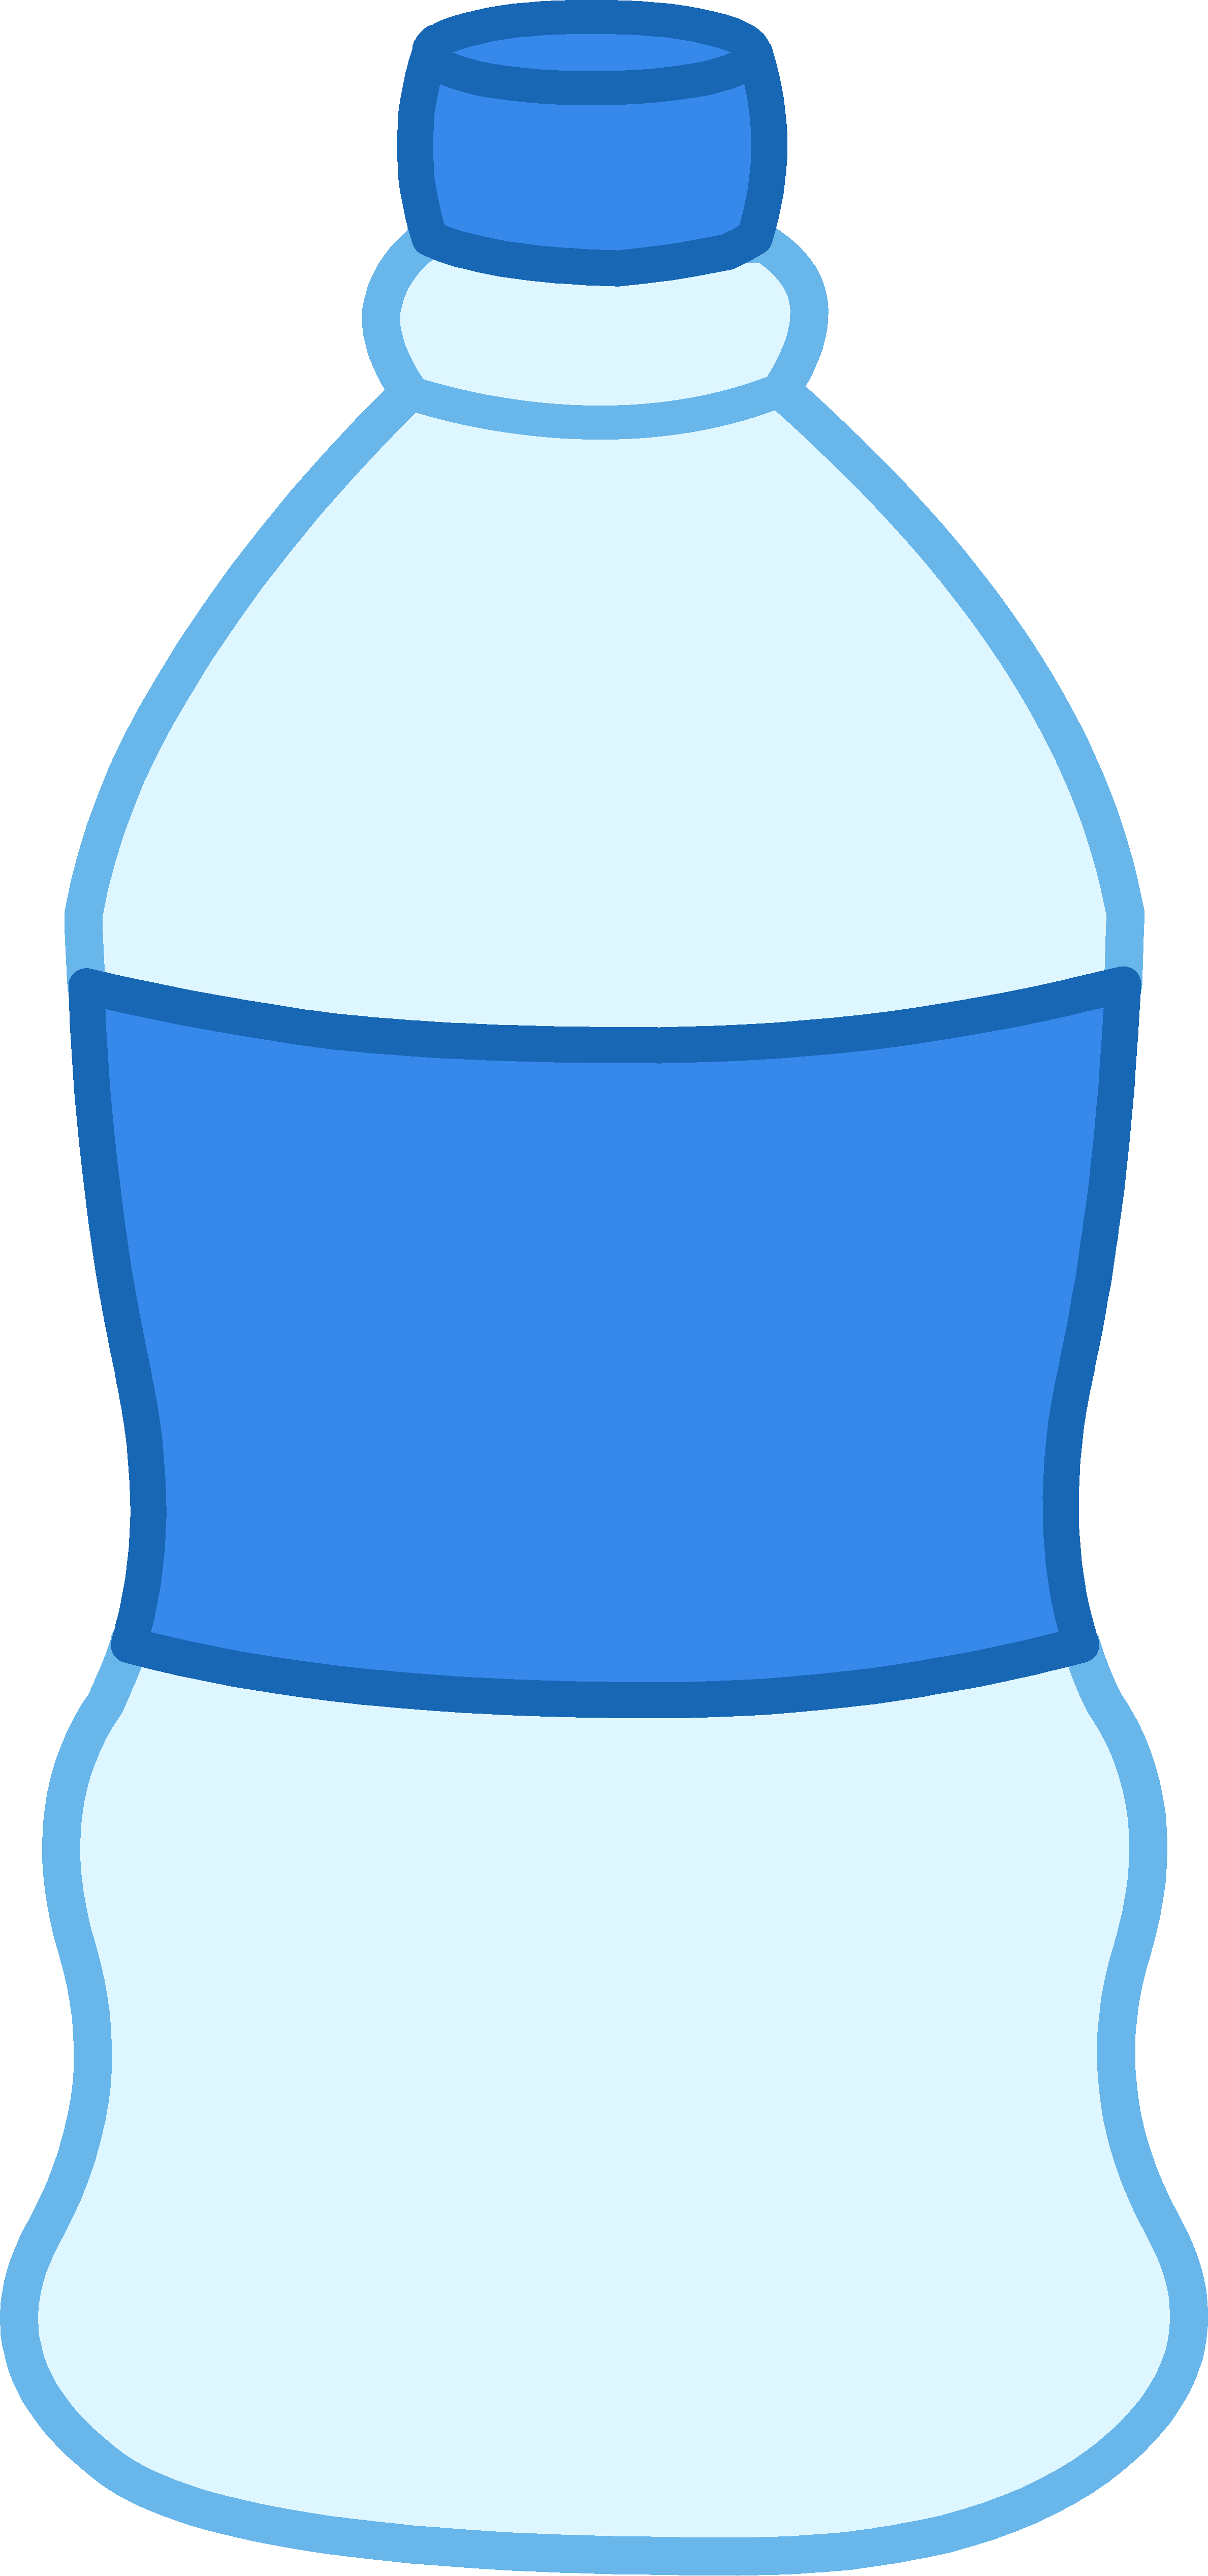 Water clipart transparent